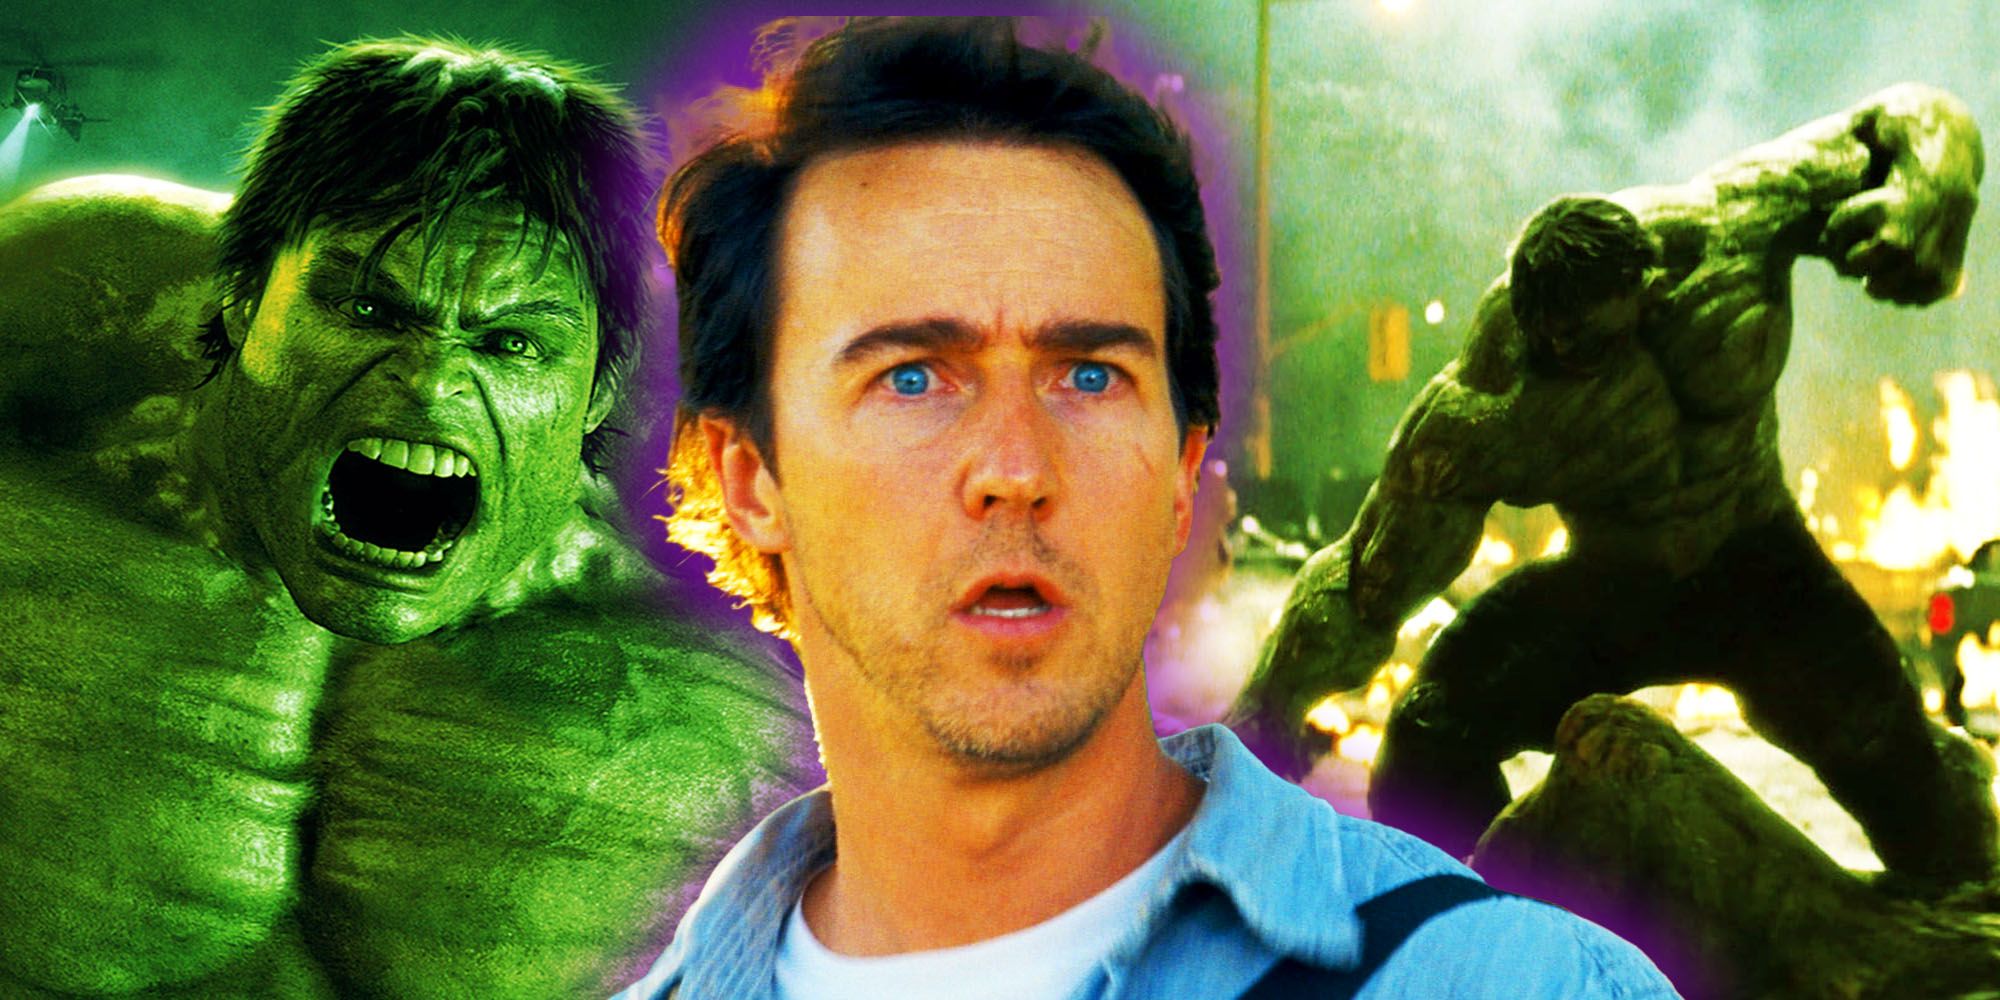 The Incredible Hulk custom image with Edward Norton looking surprised, a close-up shot of Hulk, and the Hulk punching down an enemy.